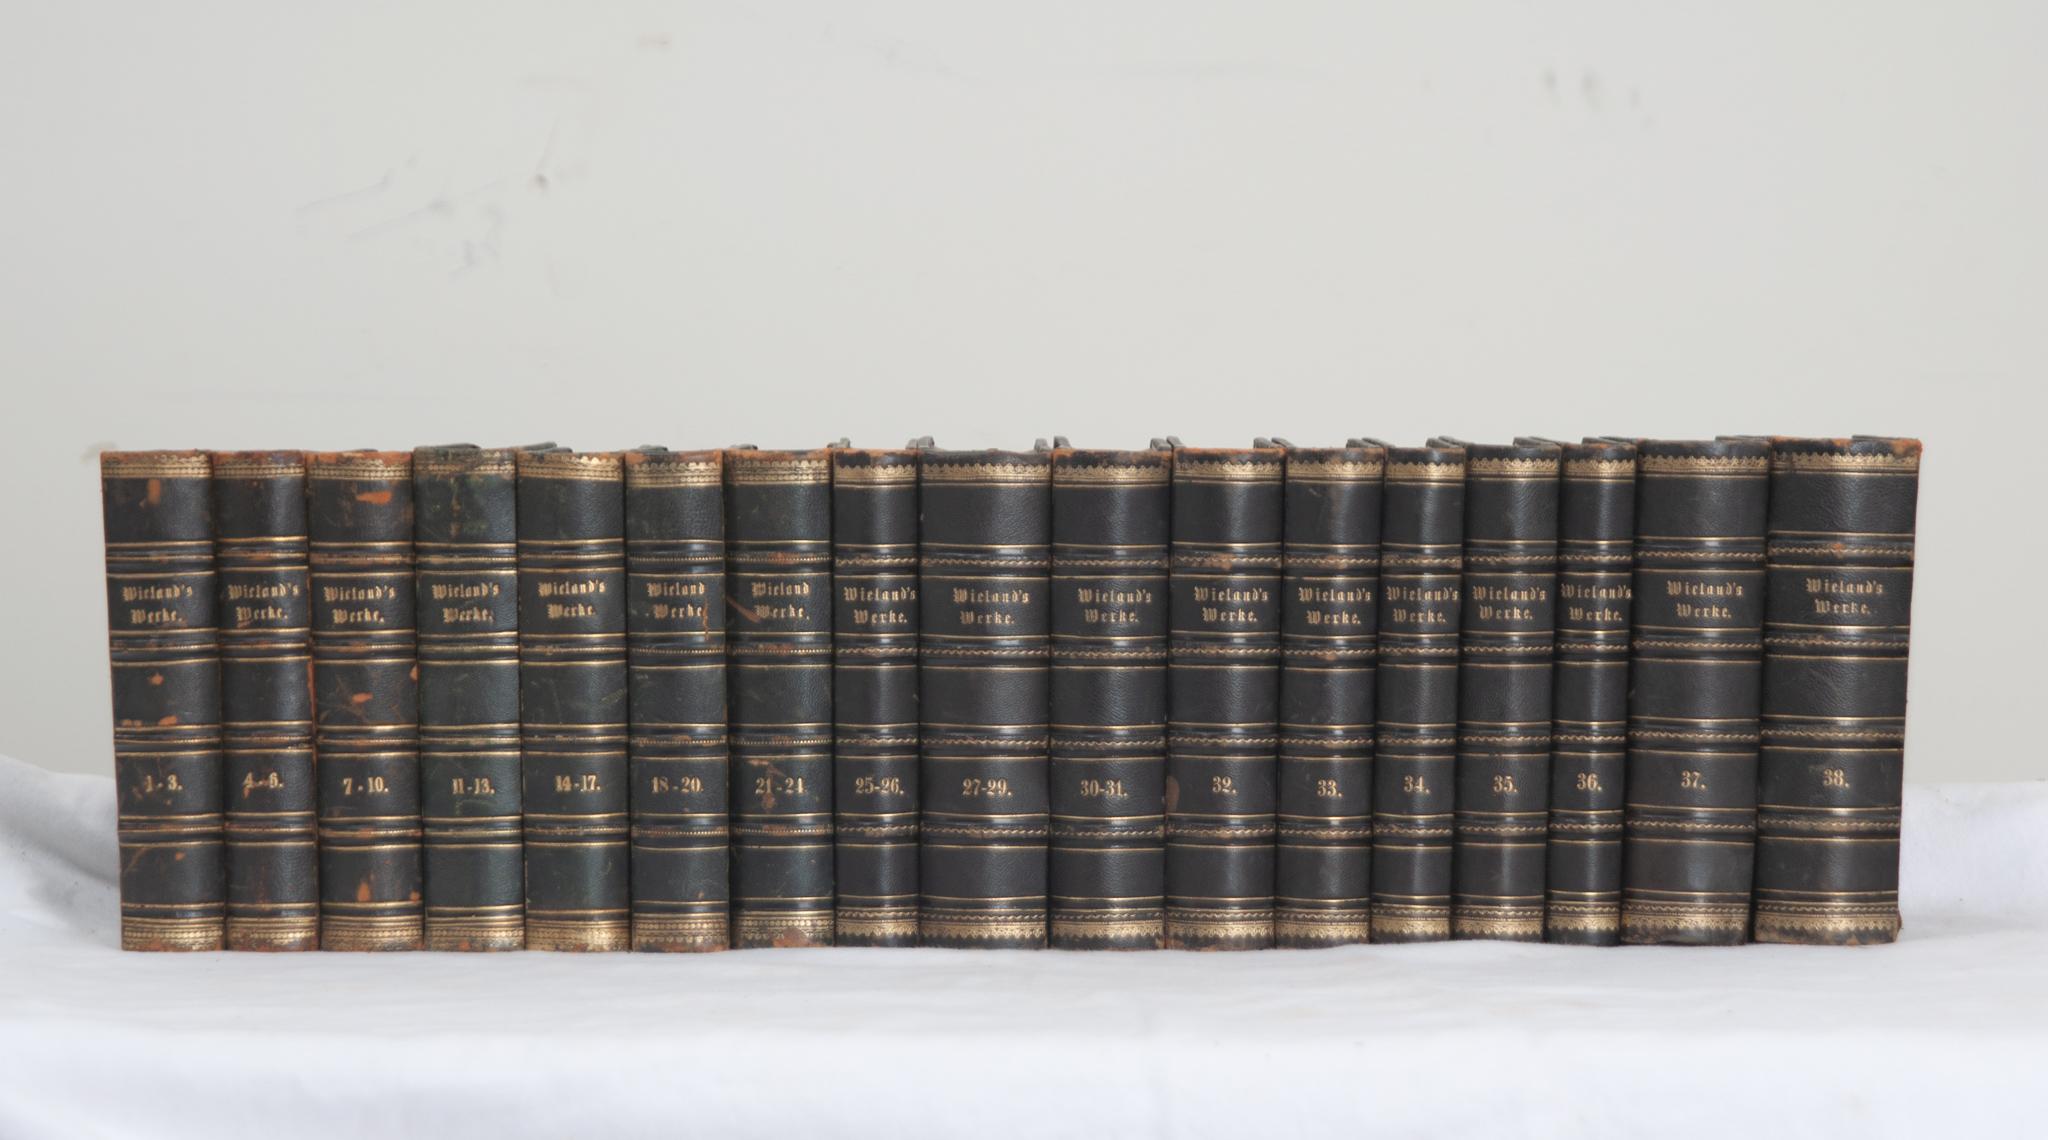 A collection of seventeen volumes of works by German poet and novelist Christoph Martin Wieland. This set of Wieland’s Werkes is bound in pressed fabric with gold lettering. Written in 1767, this set details the life and complete works of the famous